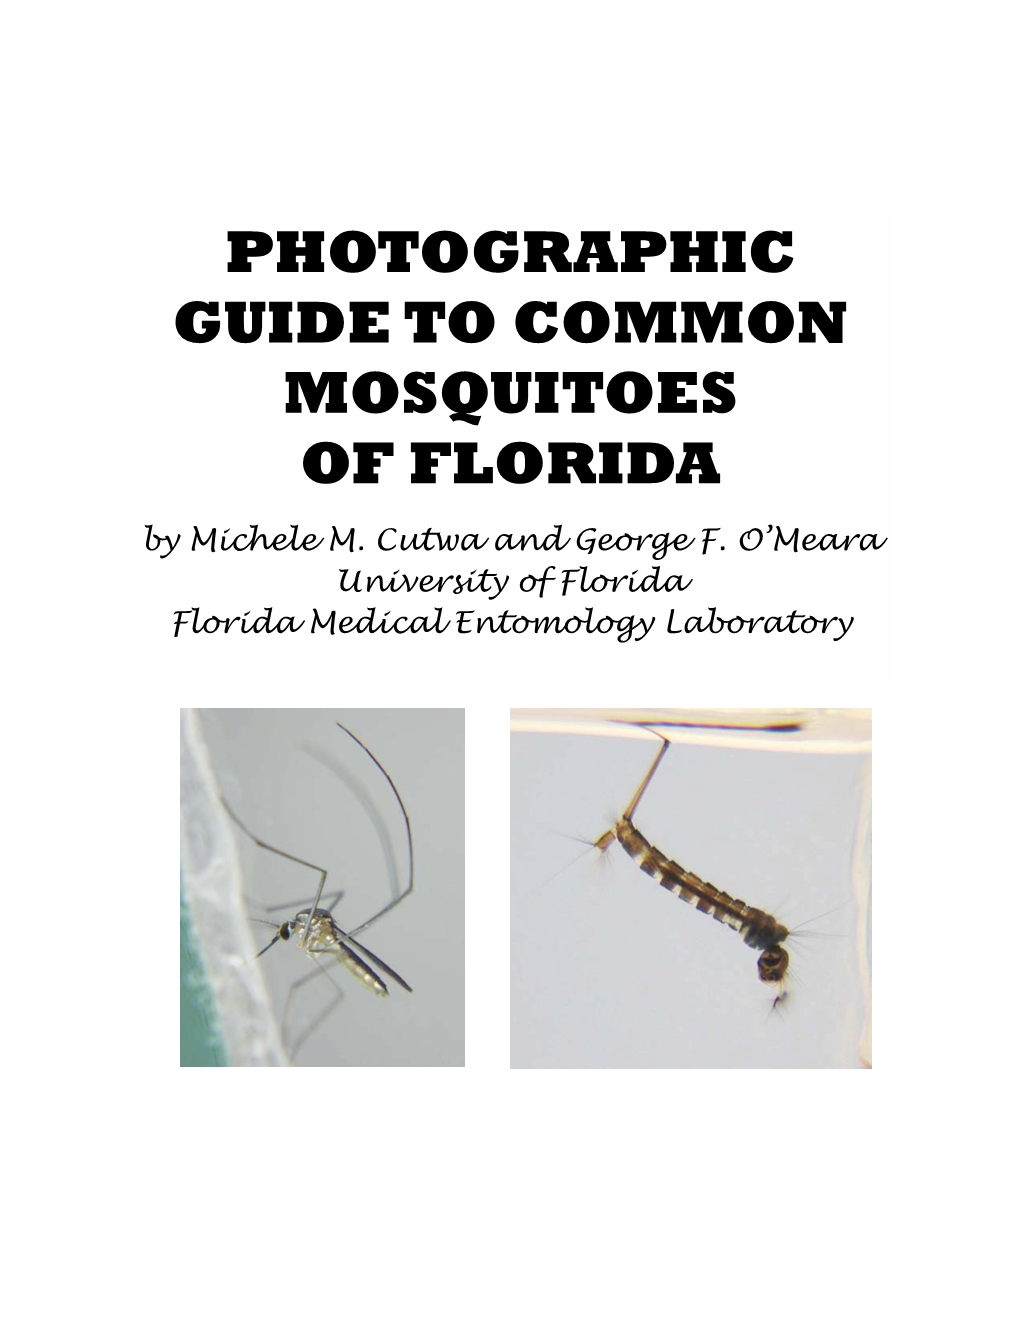 PHOTOGRAPHIC GUIDE to COMMON MOSQUITOES of FLORIDA by Michele M